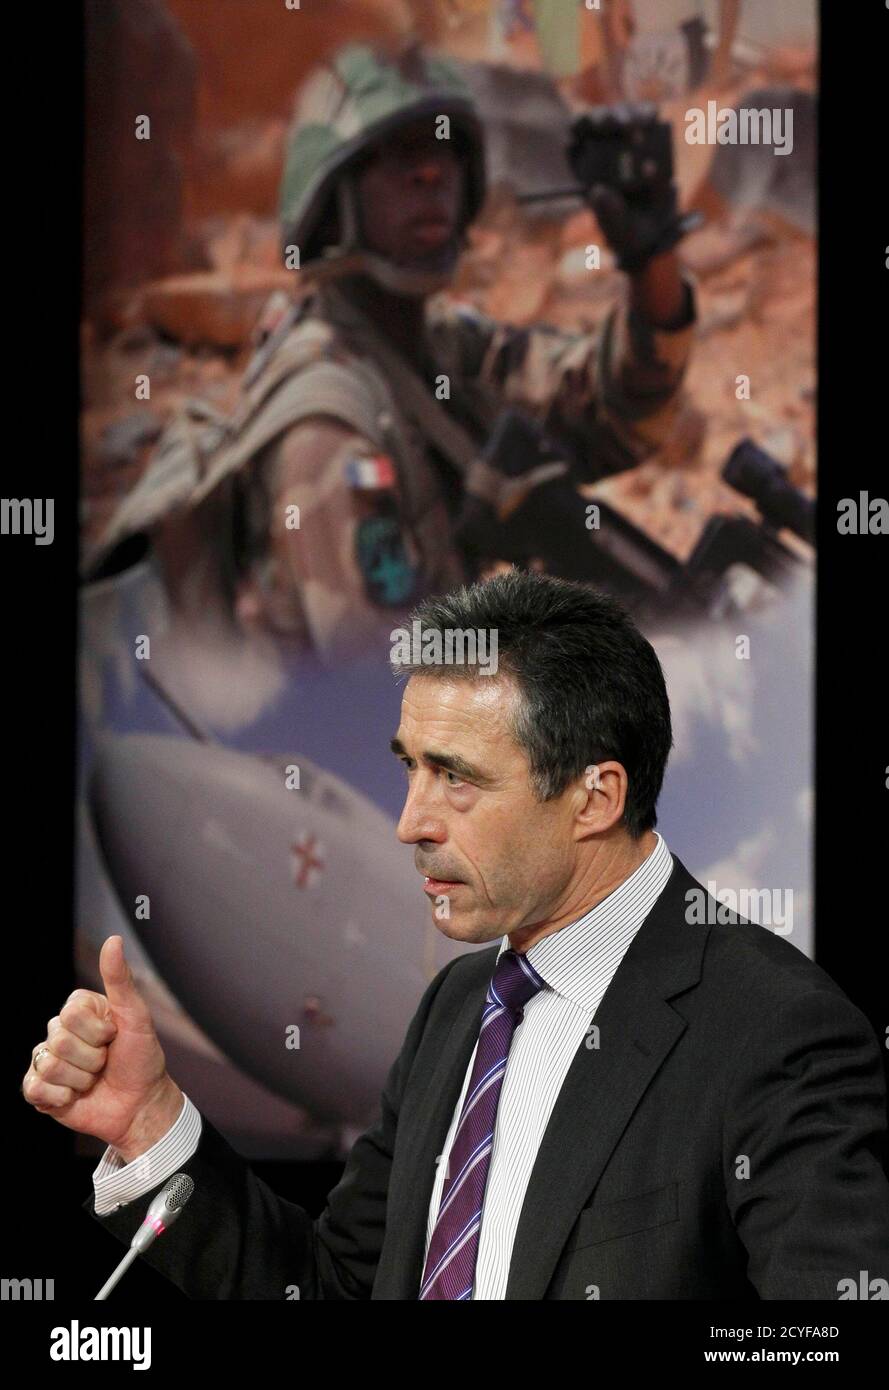 NATO Secretary General Anders Fogh Rasmussen holds a news conference during a NATO defence ministers meeting (NAC) at the Alliance headquarters in Brussels March 10, 2011. NATO defence ministers meeting in Brussels on Thursday and Friday will discuss options to respond to the turmoil in Libya, including a possible no-fly zone, the officials said.      REUTERS/Yves Herman (BELGIUM - Tags: POLITICS CIVIL UNREST MILITARY) Stock Photo